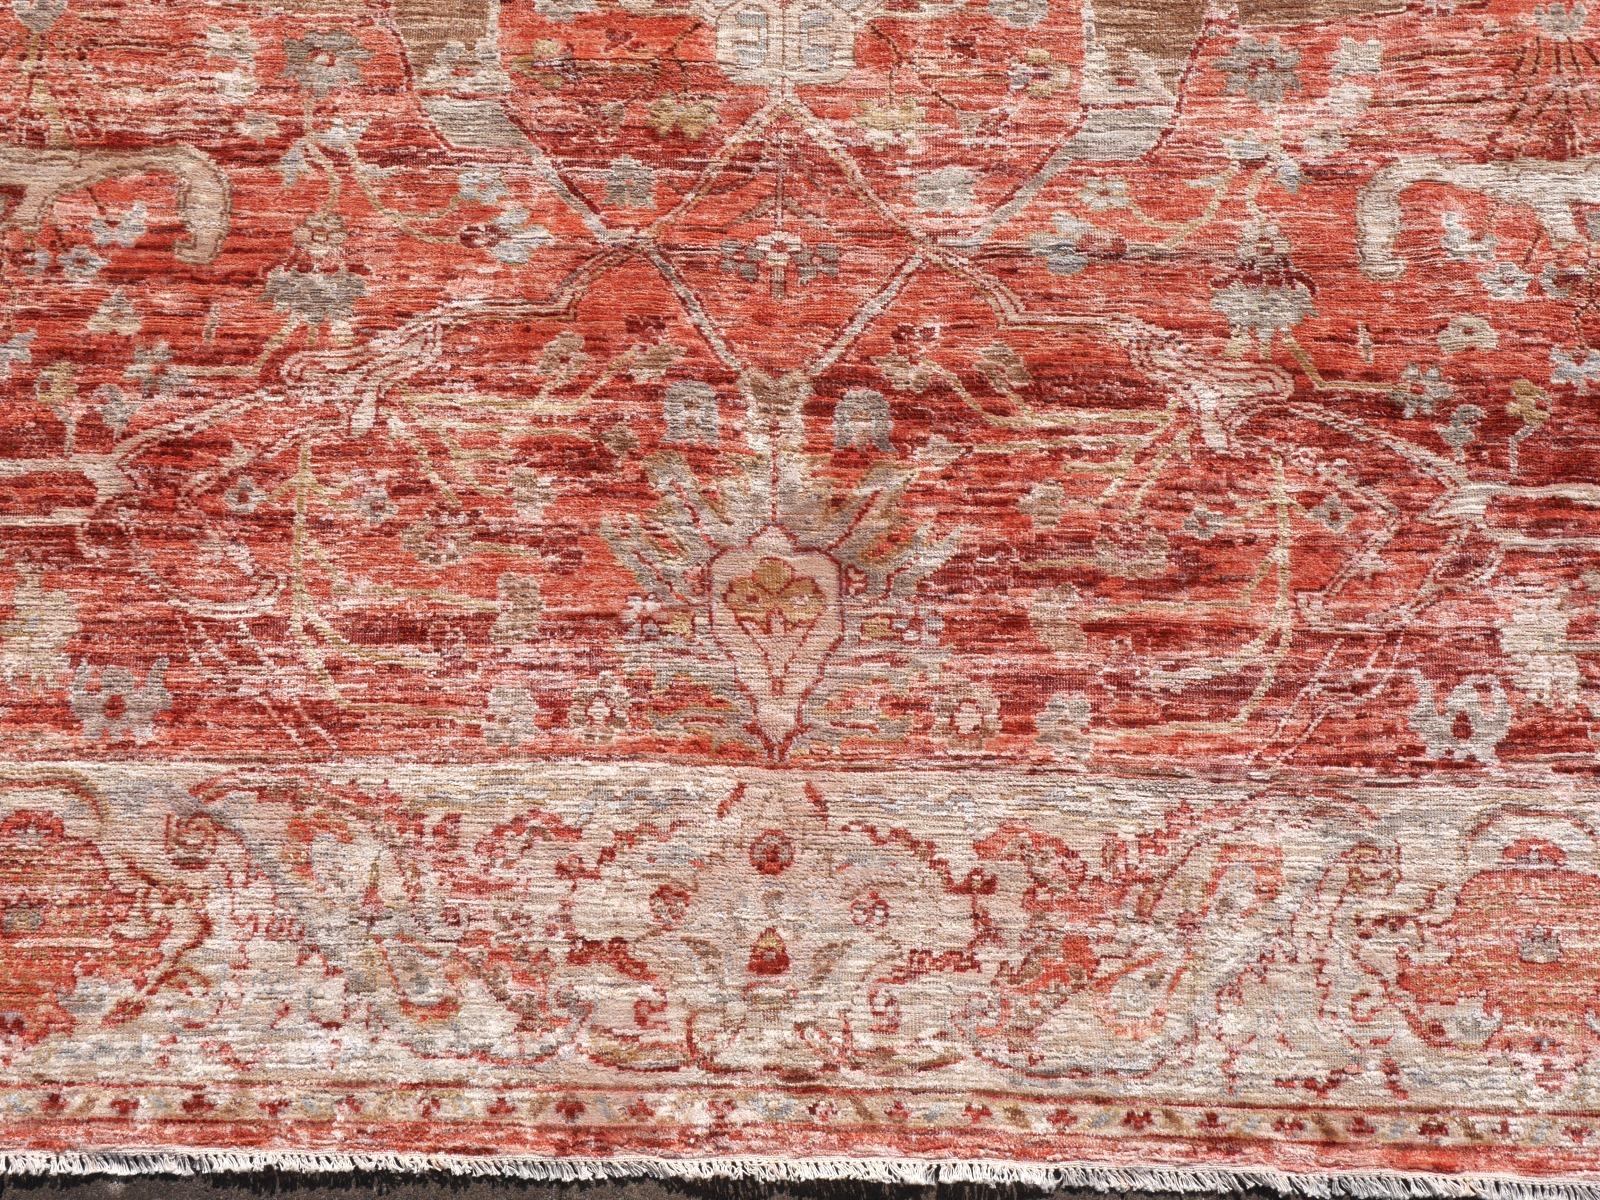 A beautiful 8 x 10 ft contemporary rug hand knotted wool and real mulberry silk pile. On a pinkish coral red field, the design of traditional Oushak and Heriz elements standing next to each other executed in beiges, browns and copper tones.
Design